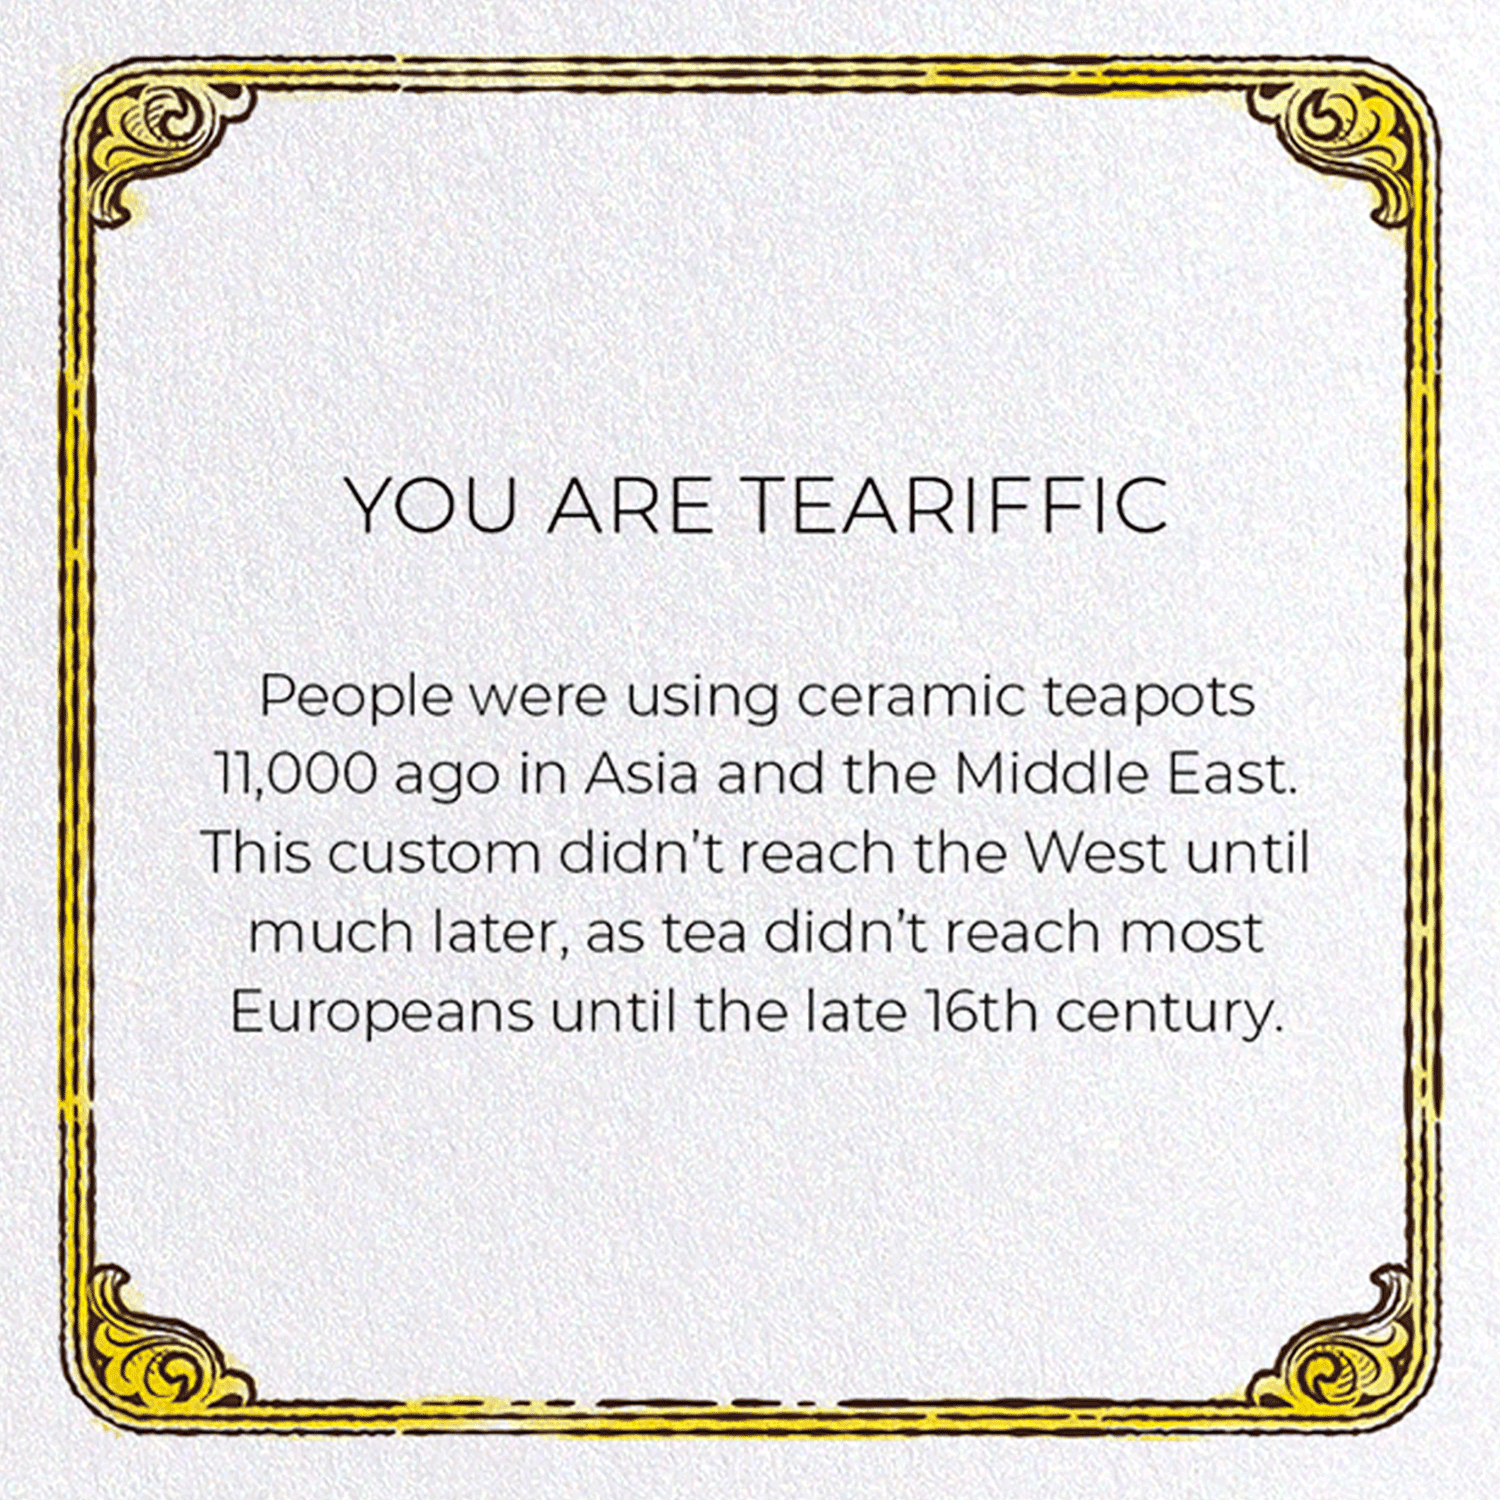 YOU ARE TEARIFFIC